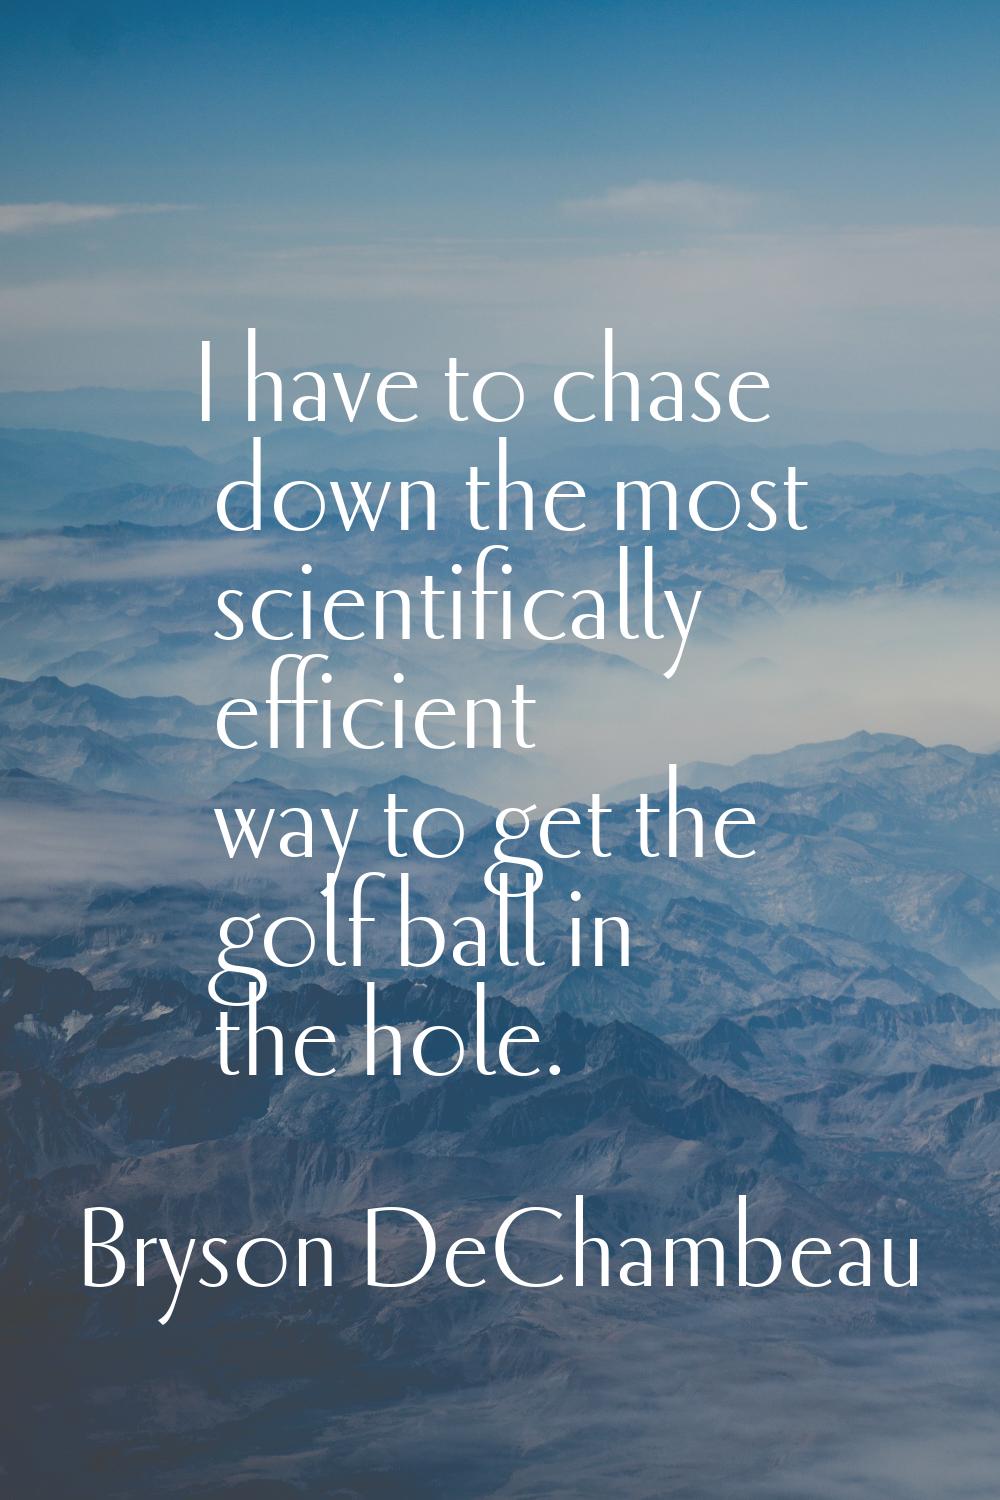 I have to chase down the most scientifically efficient way to get the golf ball in the hole.